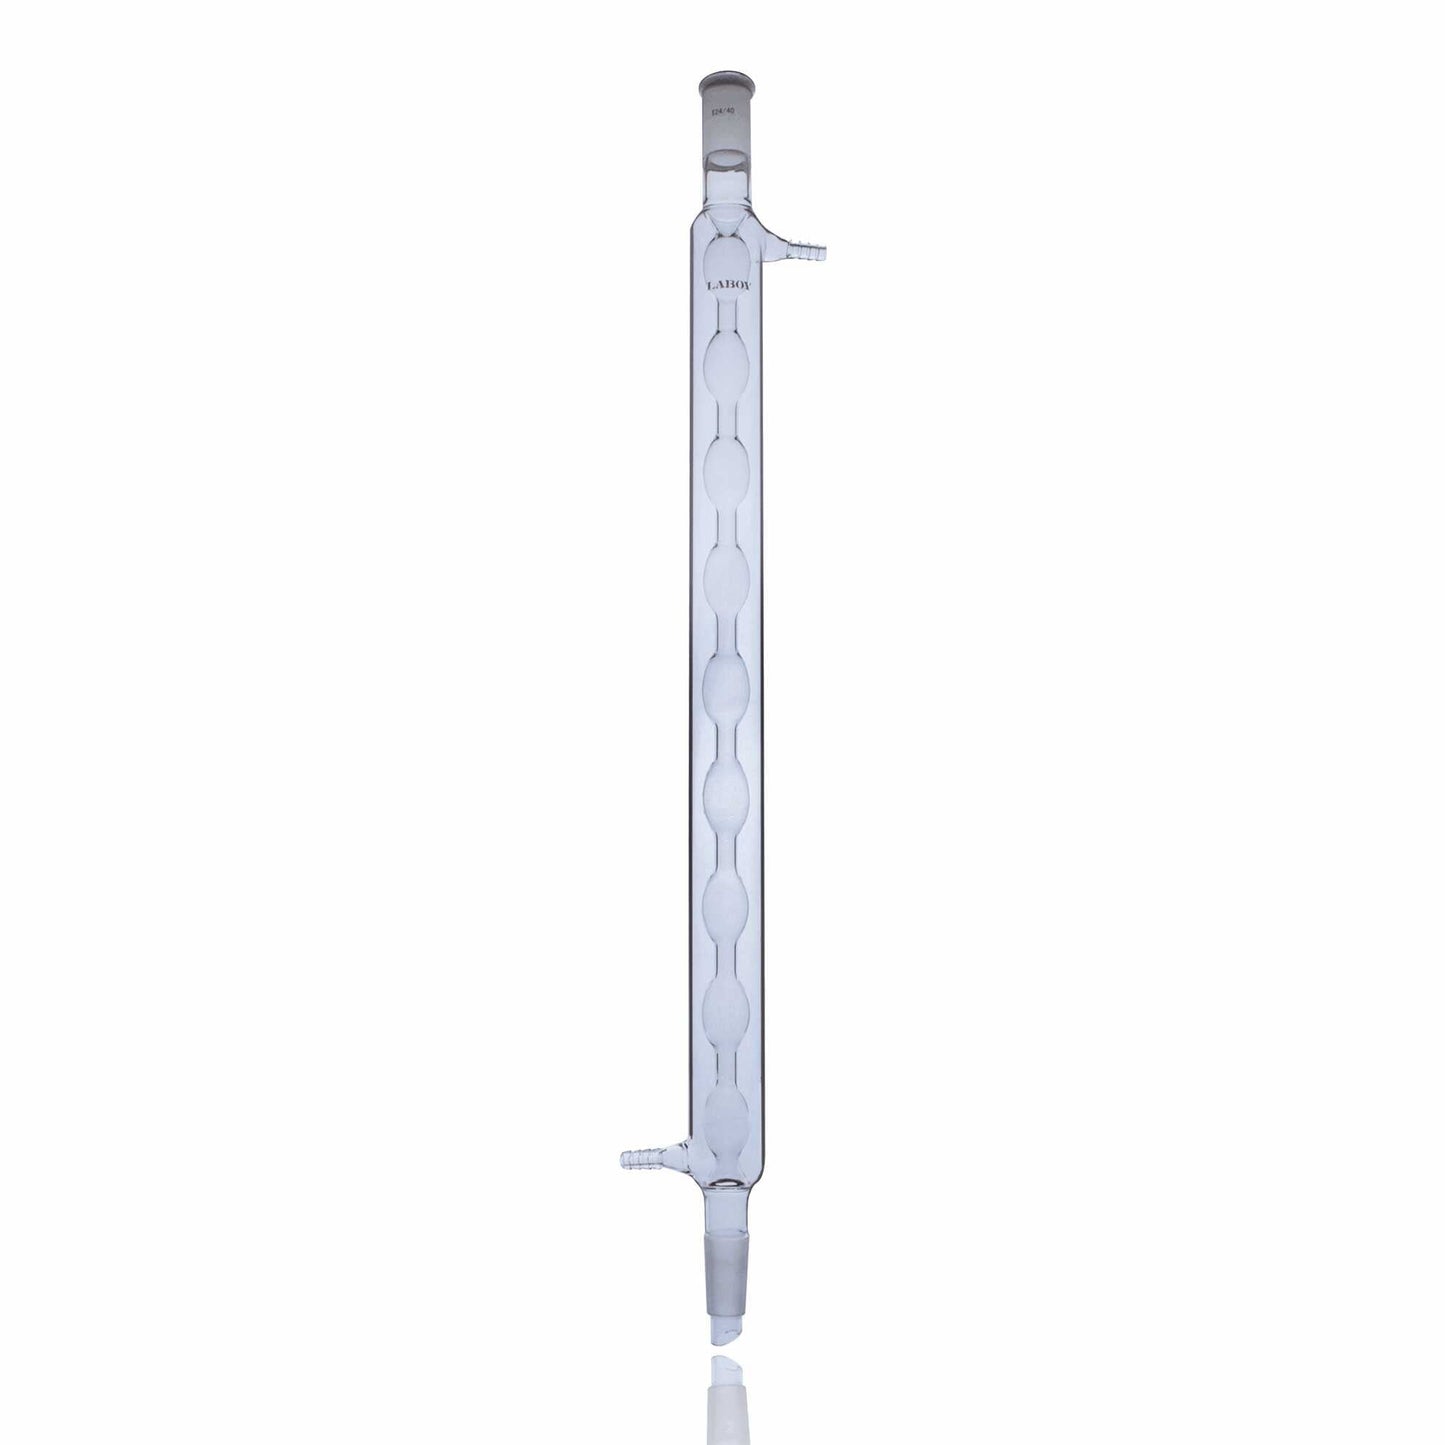 Glass Allihn Condenser With Standard Taper Joint and Hose Connections - Scienmart